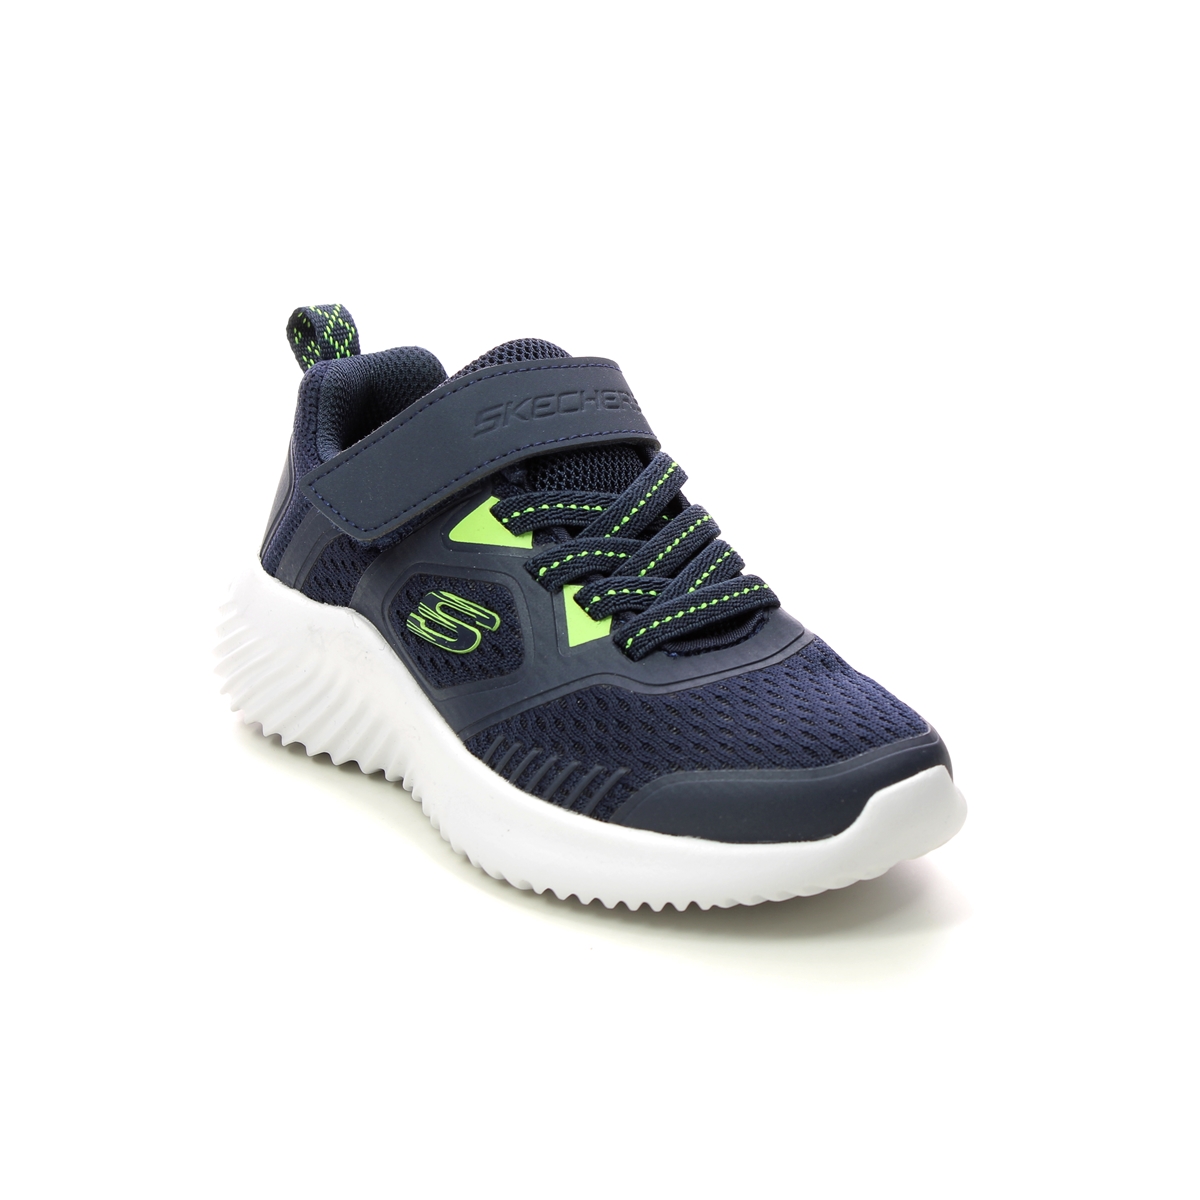 Skechers Bounder Navy Lime Kids Trainers 403736L In Size 29 In Plain Navy Lime For kids